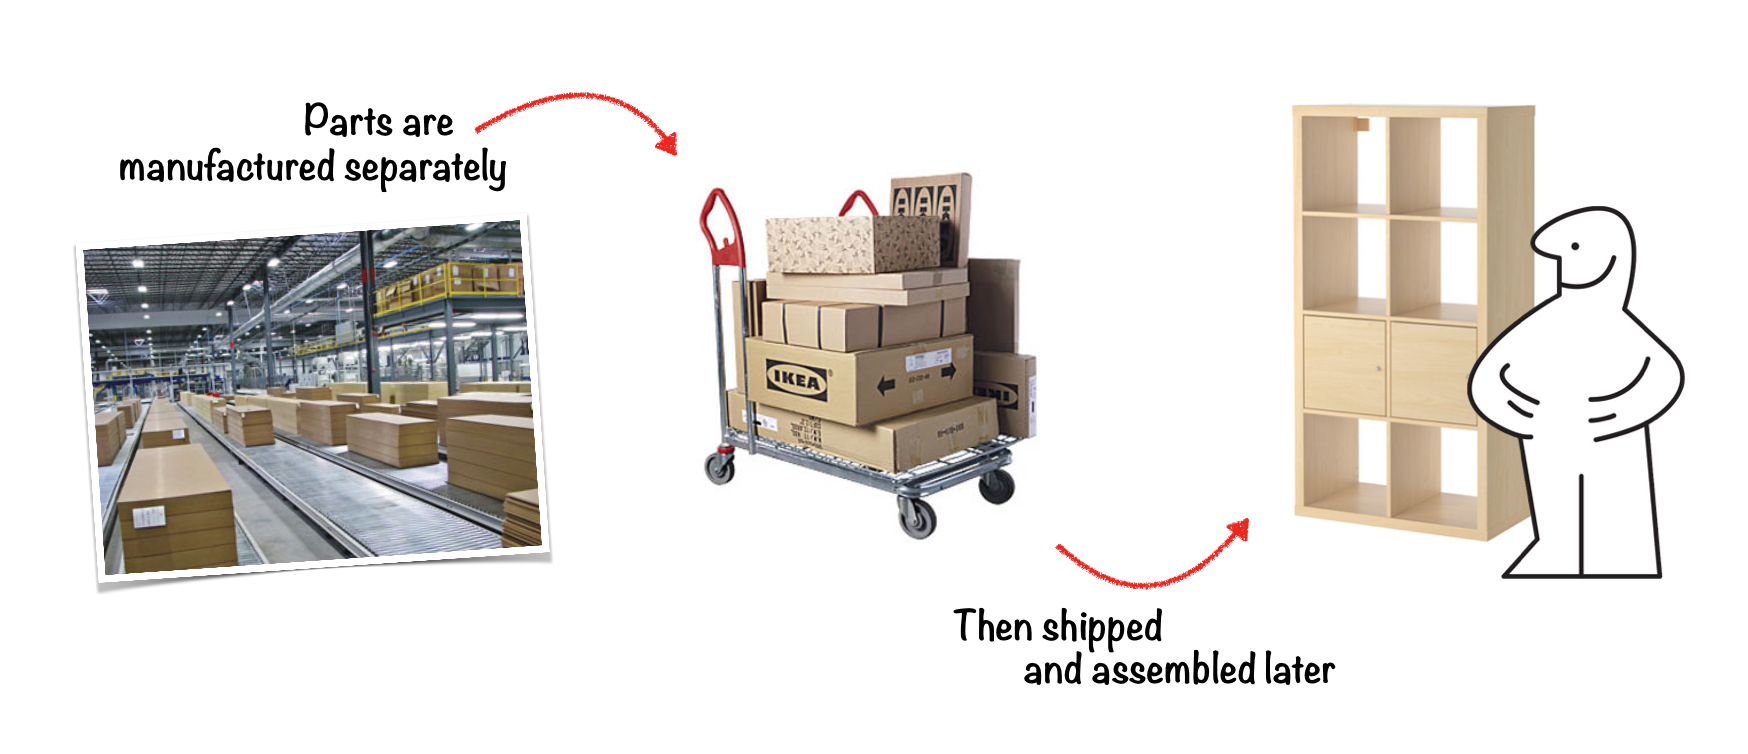 Manufacturing part separately allows to ship and sell them for a lower cost 